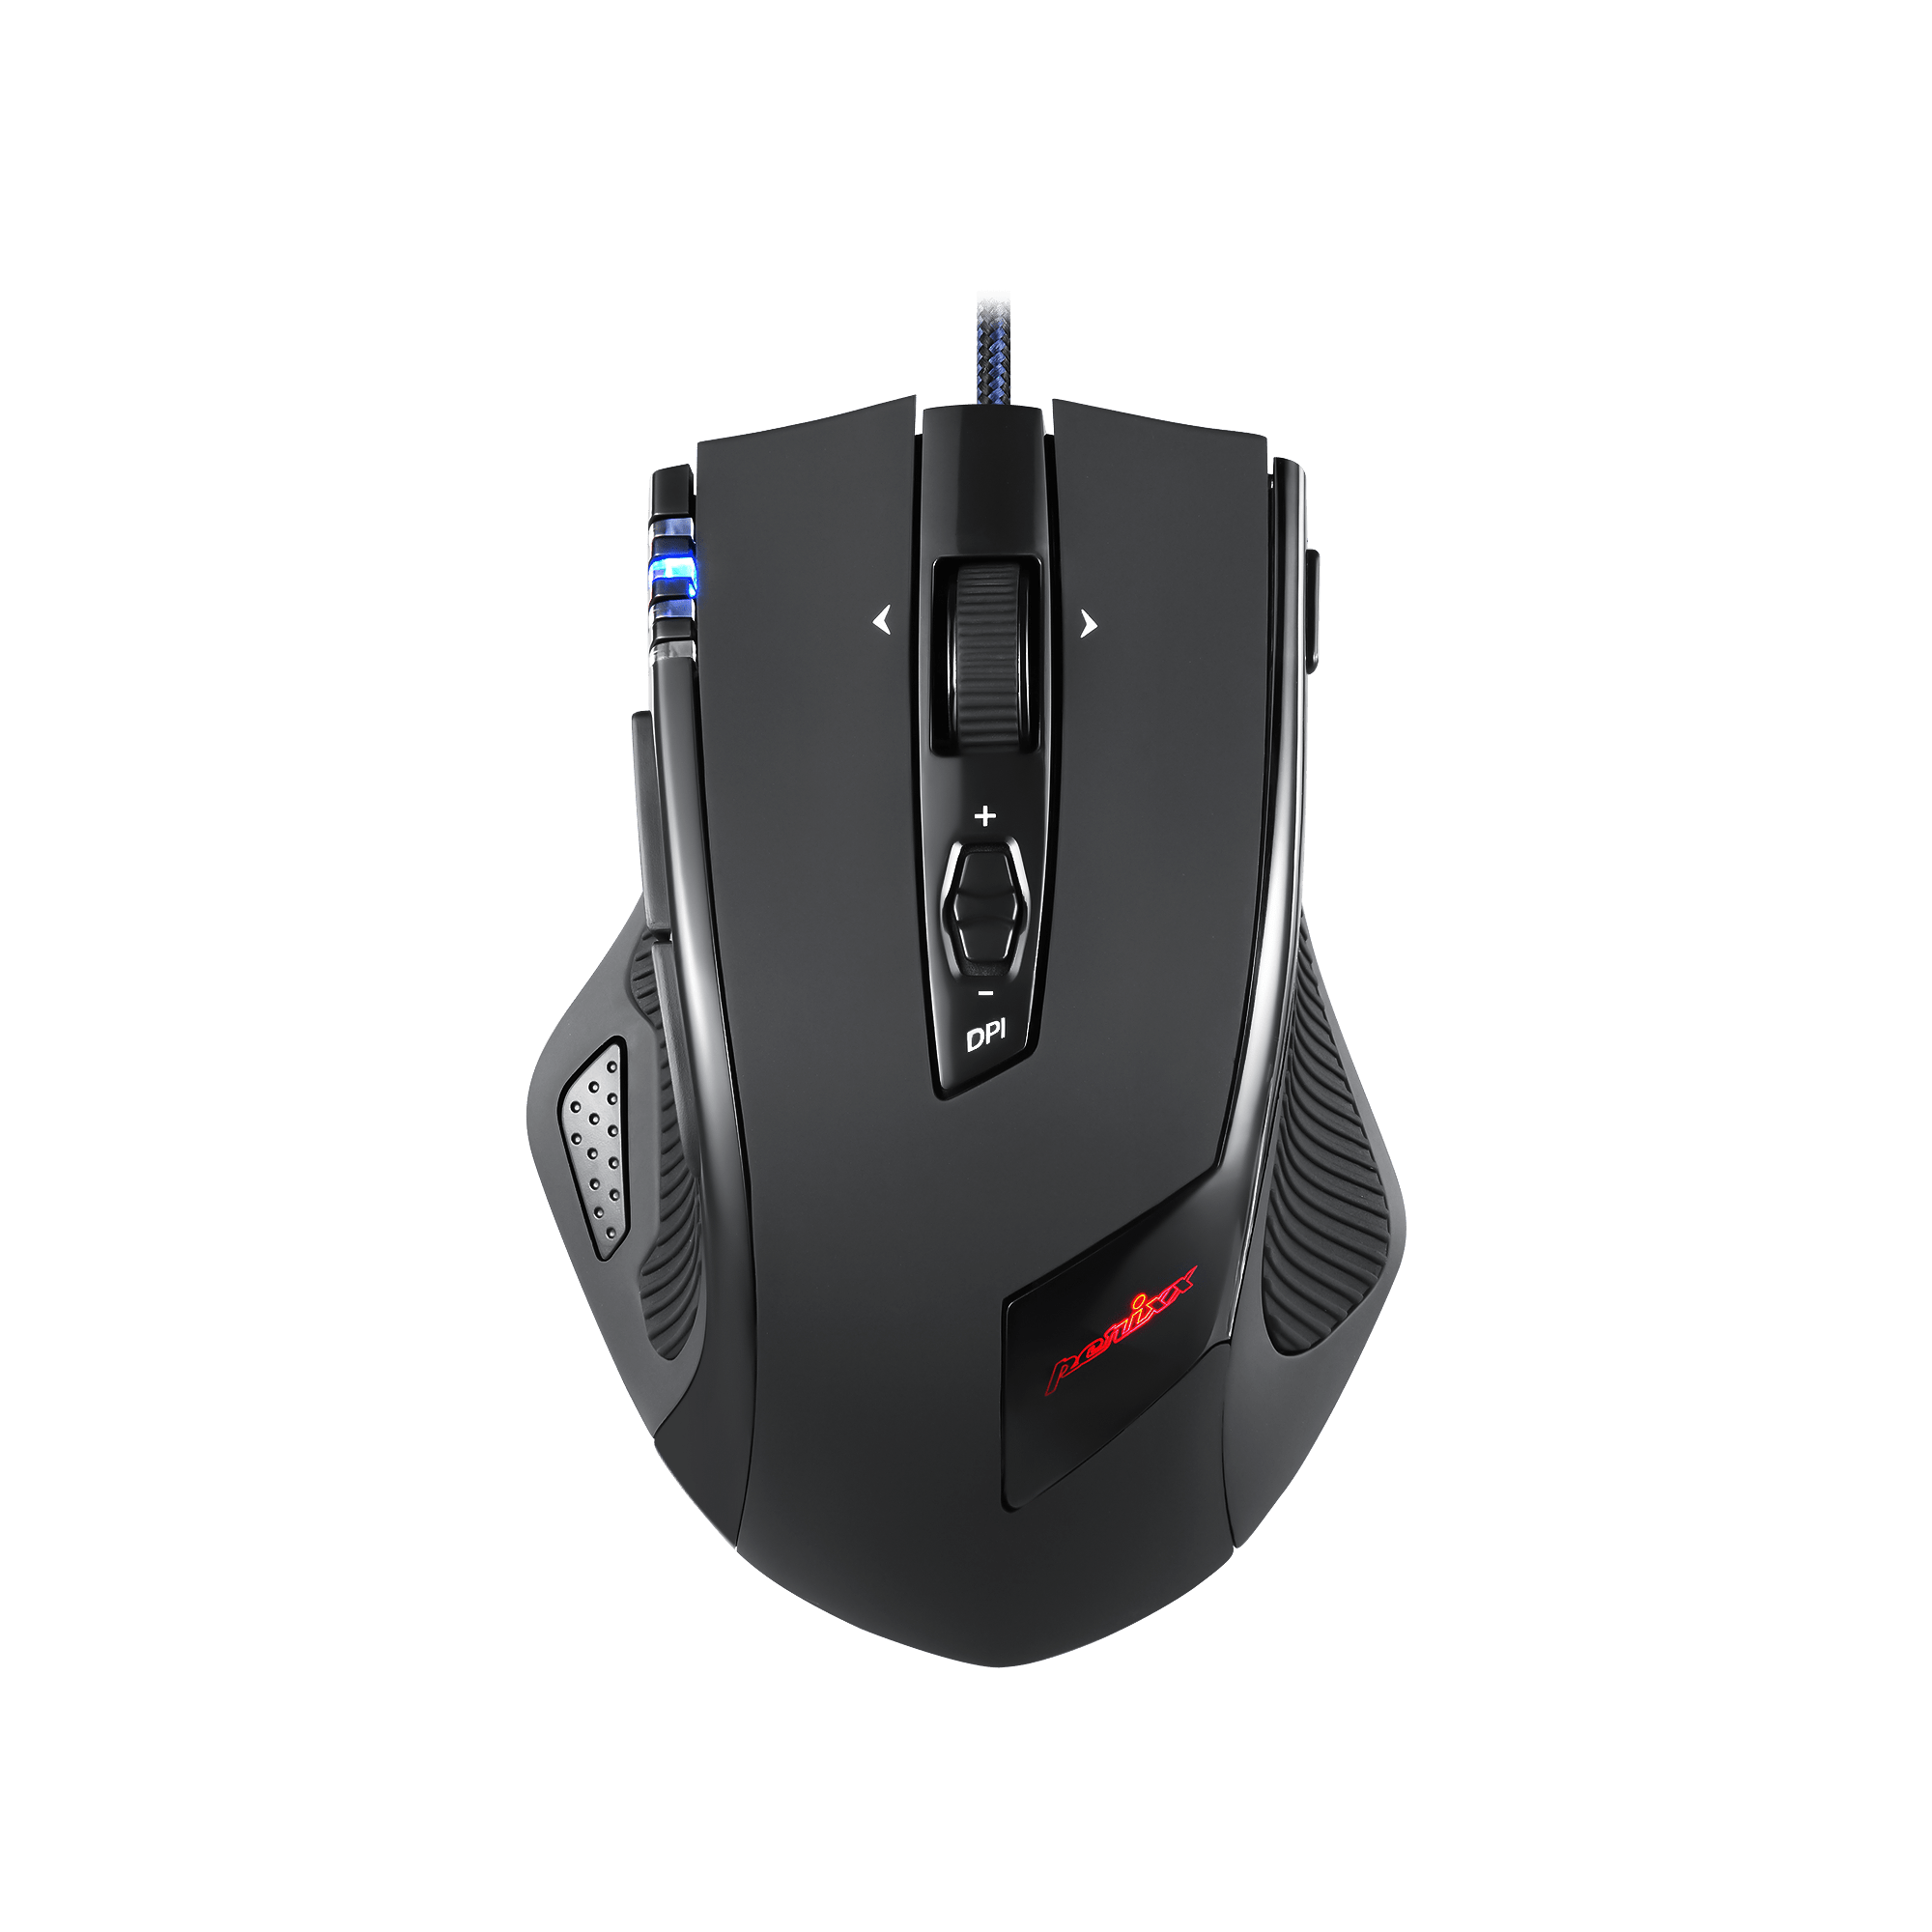 MX-2000 - Wired Programmable Gaming Mouse up to 5600 DPI - Perixx Europe